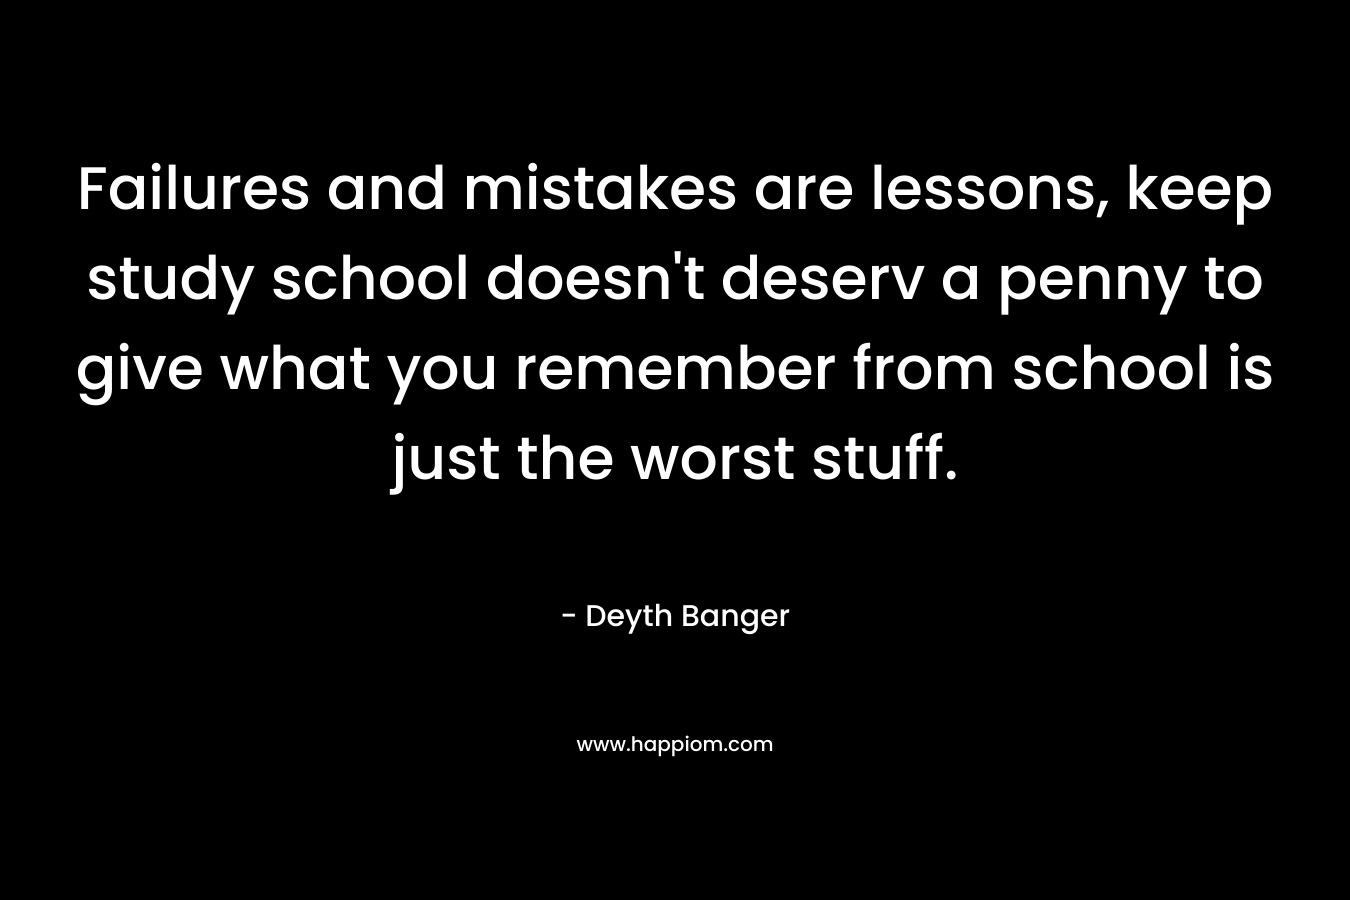 Failures and mistakes are lessons, keep study school doesn't deserv a penny to give what you remember from school is just the worst stuff.